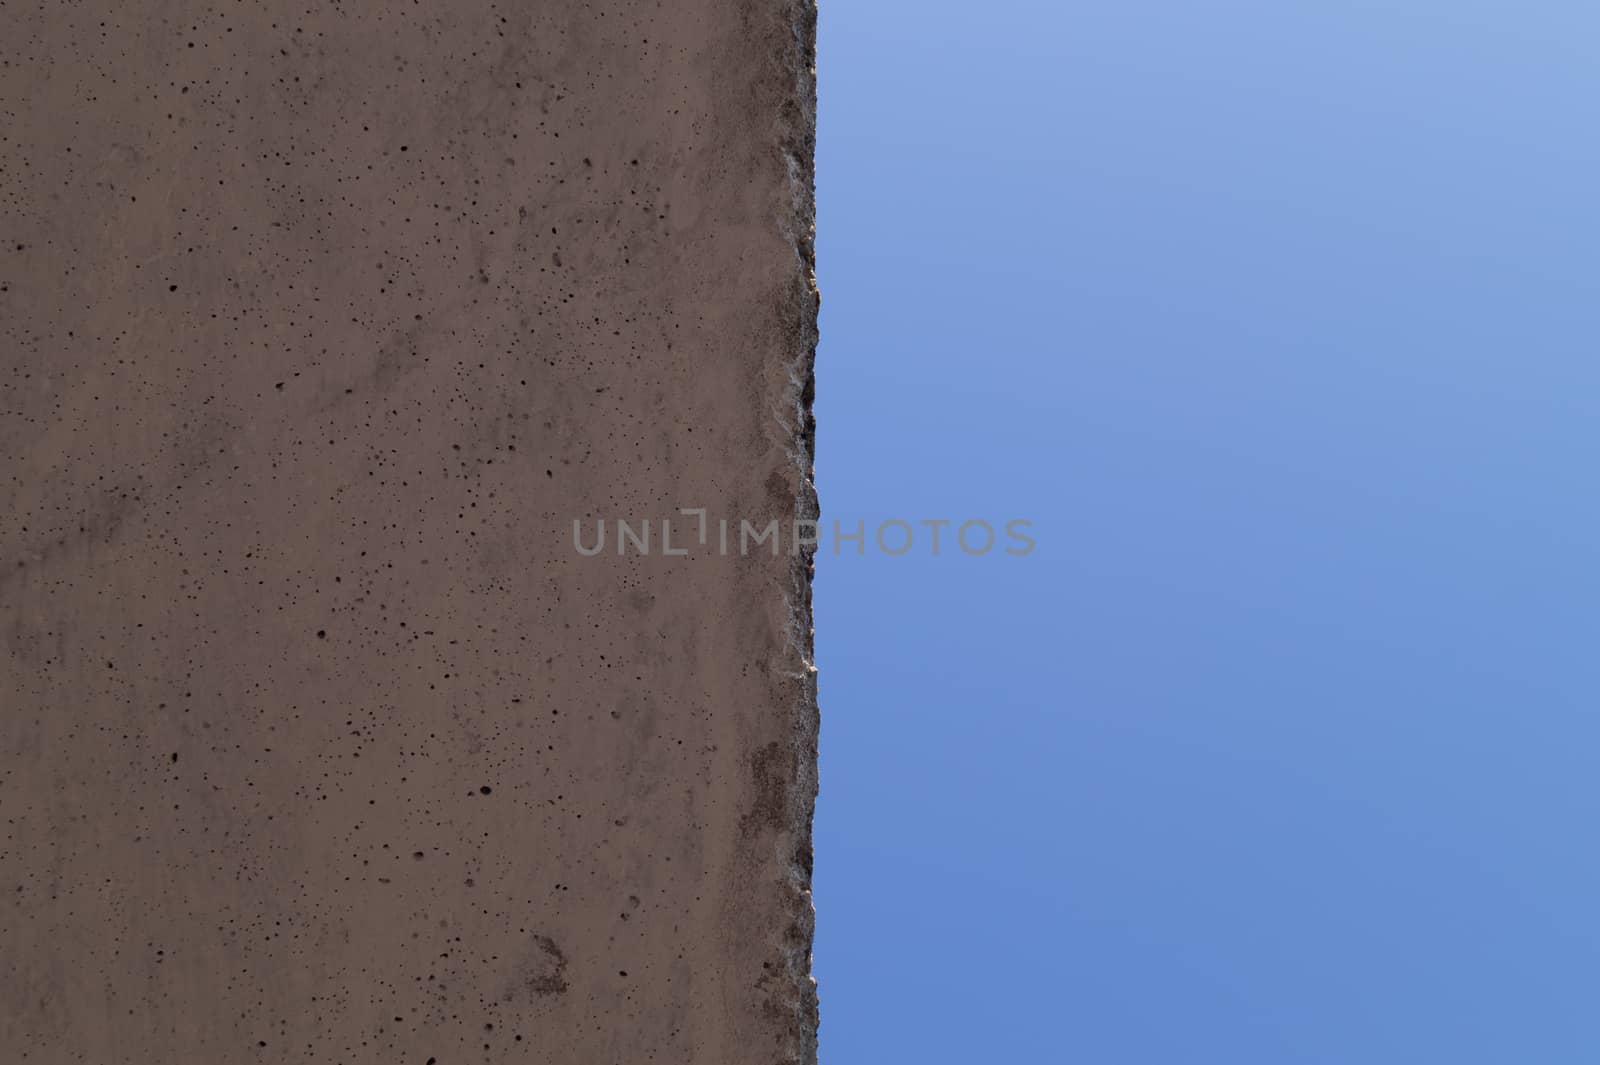 The wall and blue sky crossed the line in center. Abstract photo.